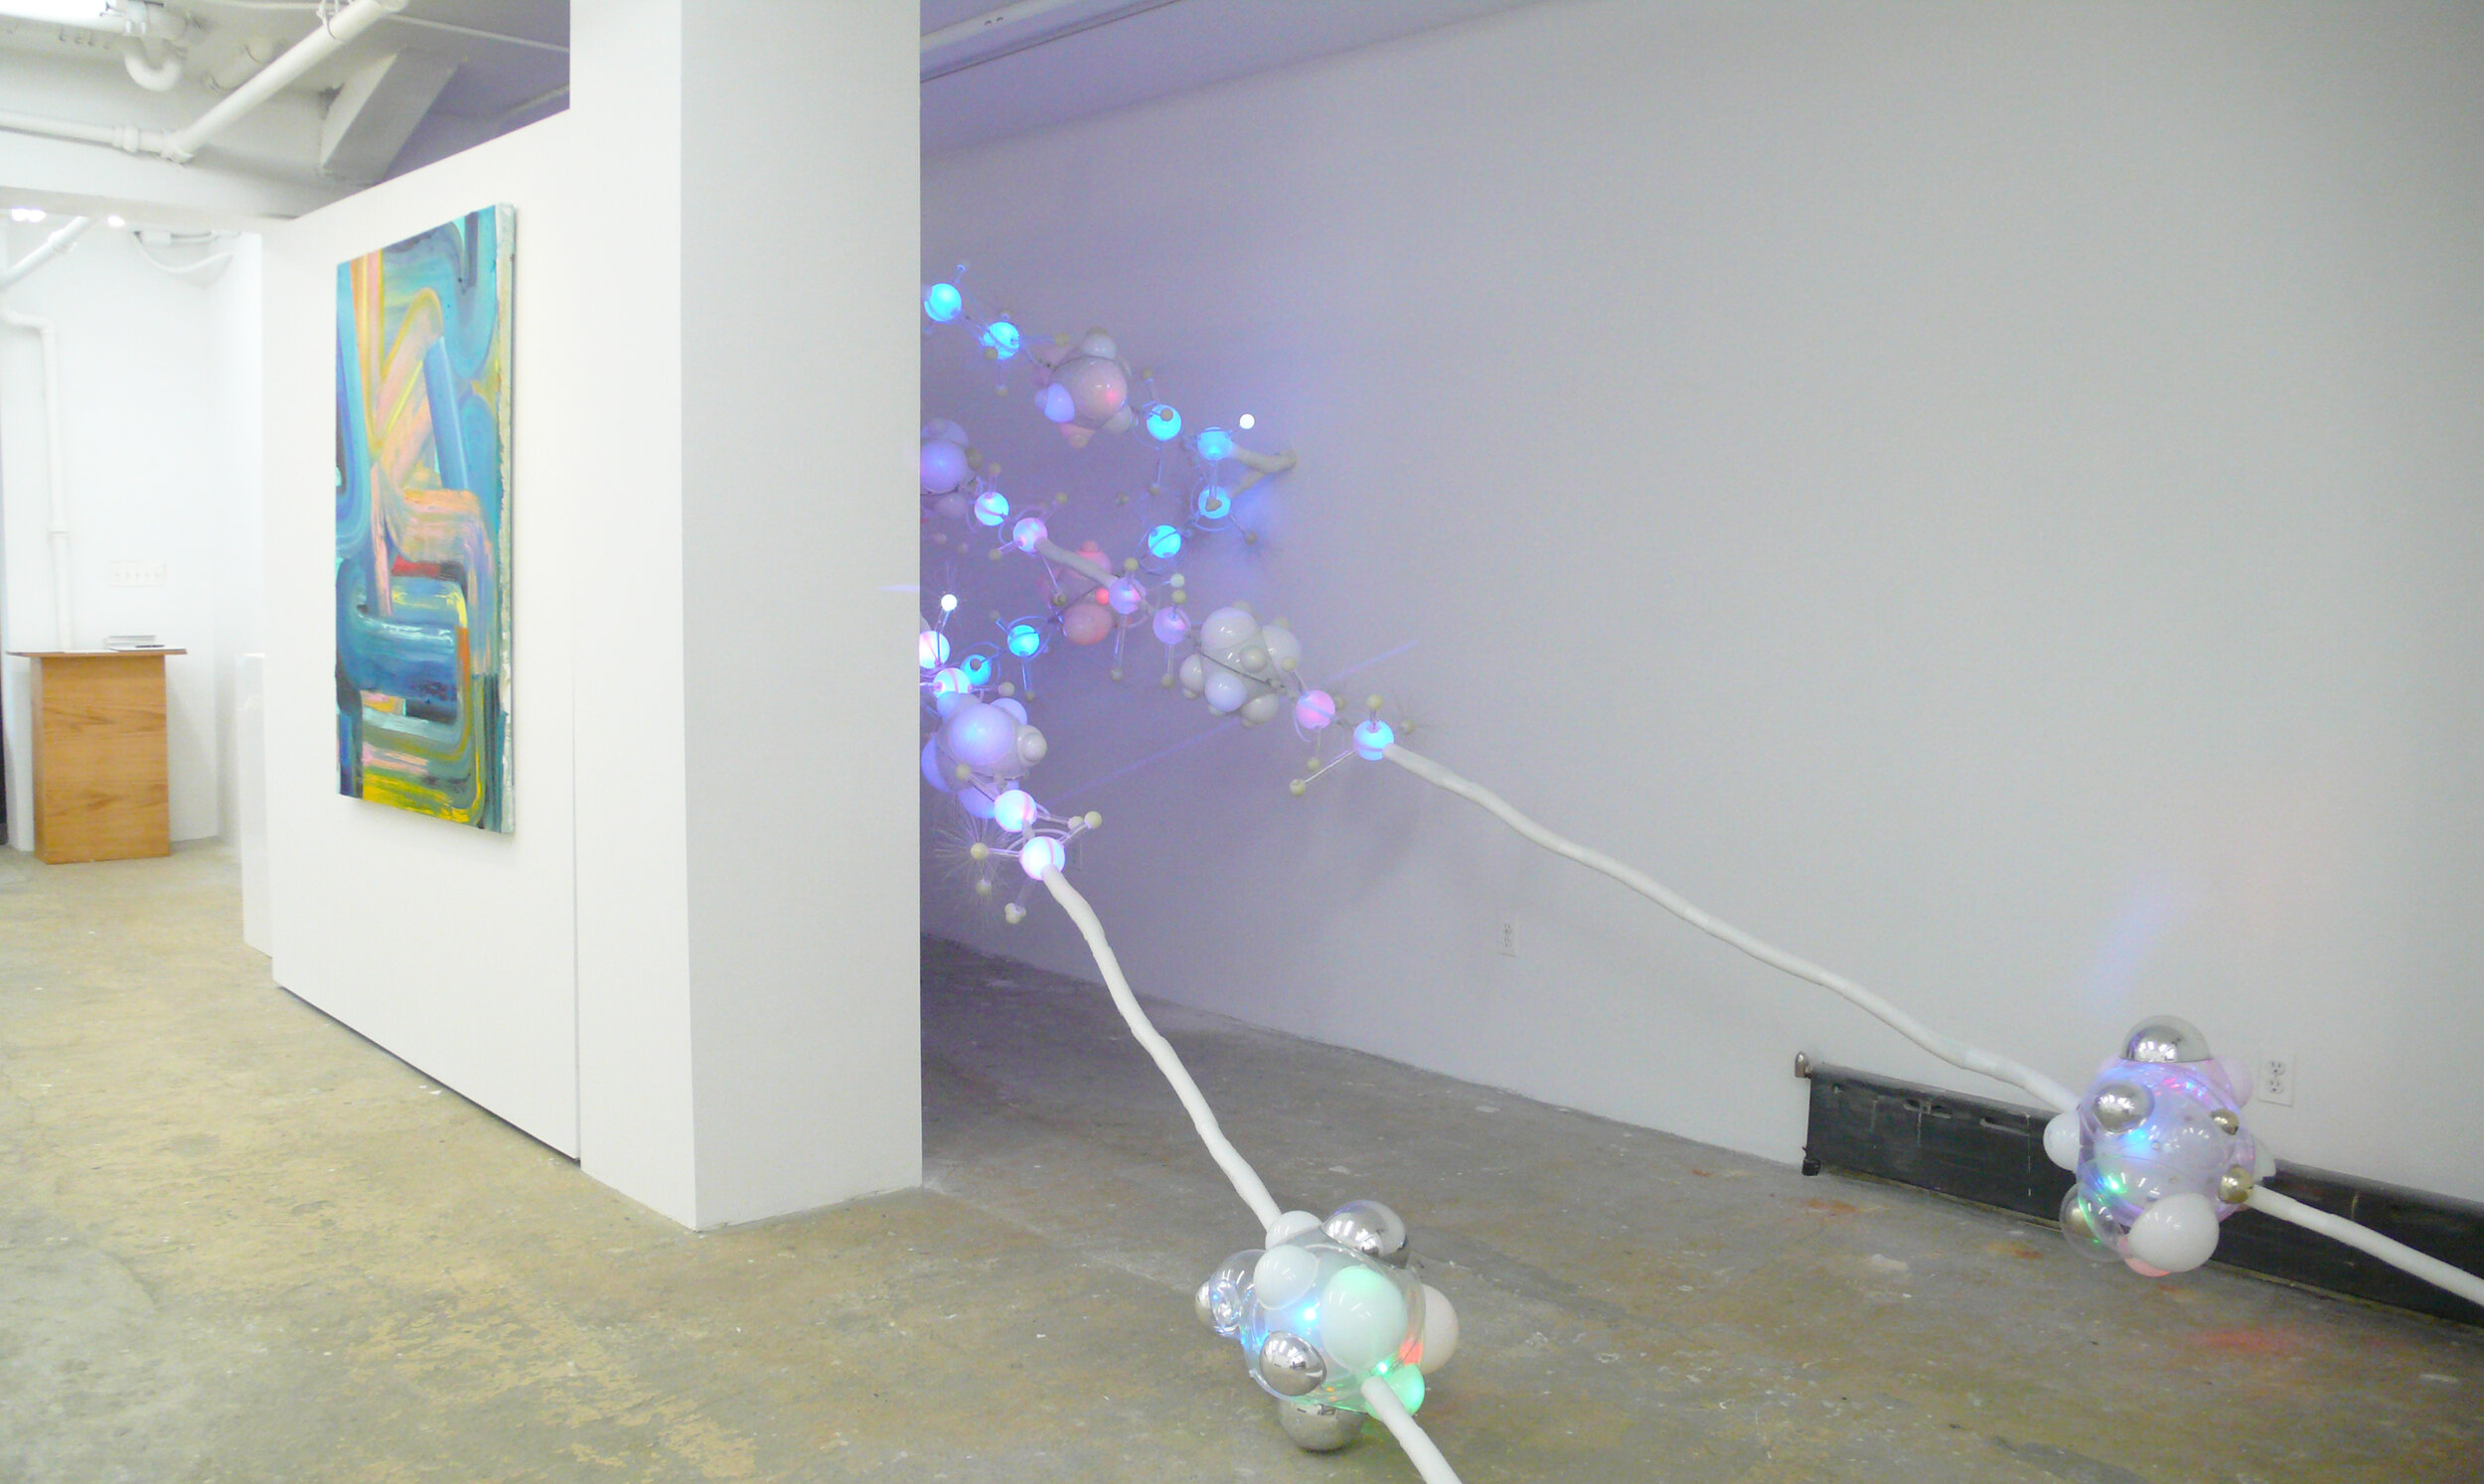 Installation image from the 2011 exhibition, Soda Pop: Effervescence and Abstraction , featuring works by Charles Dunn, Nicole Poko, Brendan Smith, Jeremiah Teipen, at Cindy Rucker Gallery